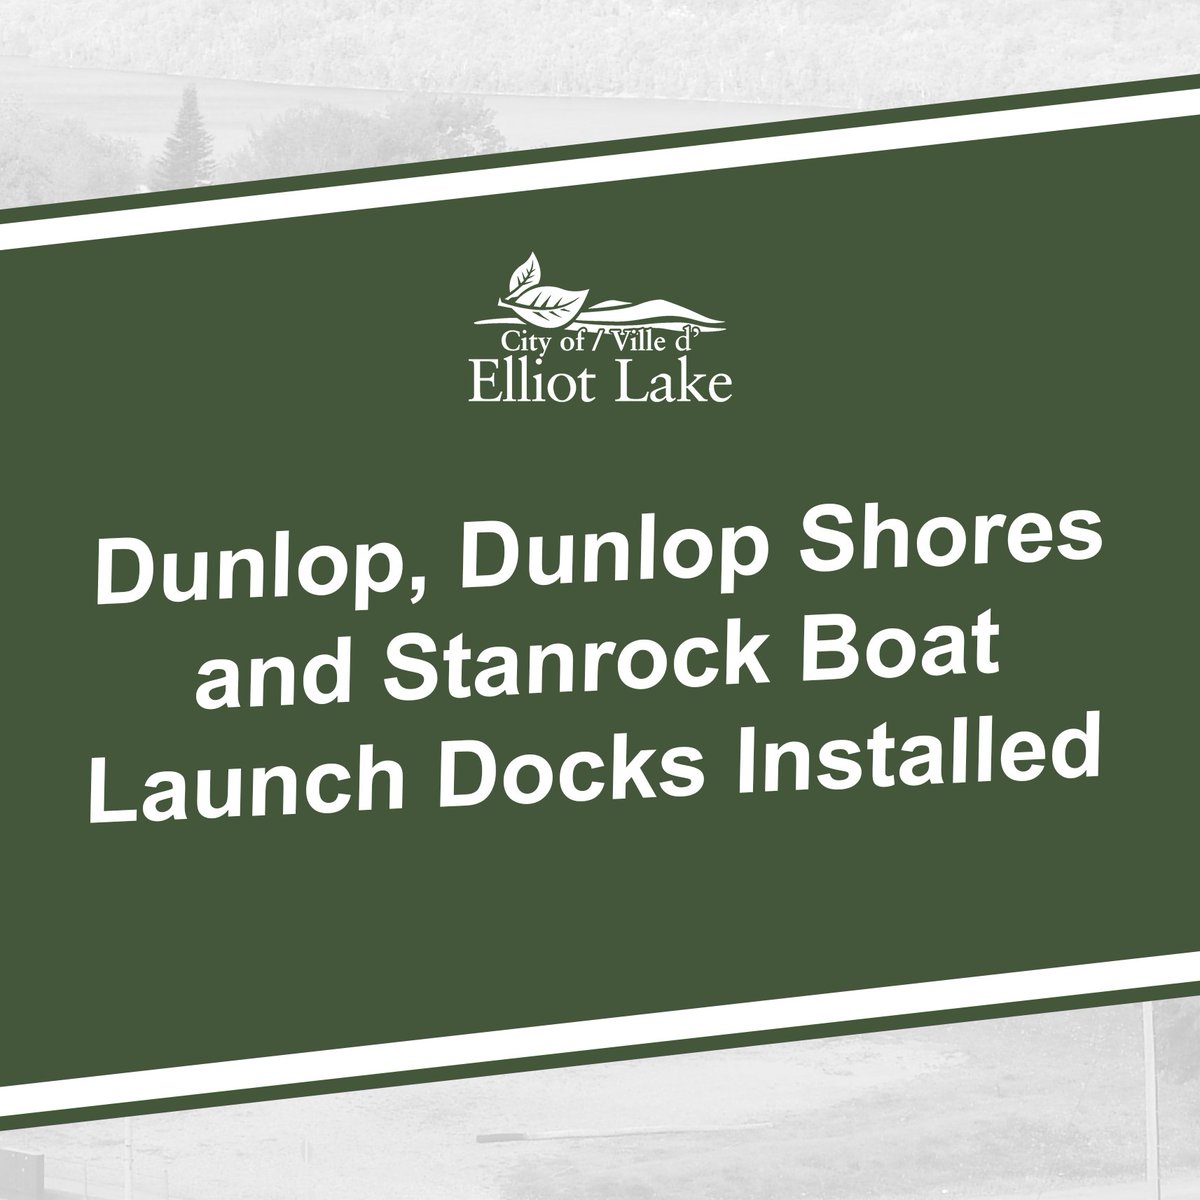 The Boat Launch Docks at Dunlop, Dunlop Shores and Stanrock have been installed. Other boat launch docks will be installed as conditions allow.